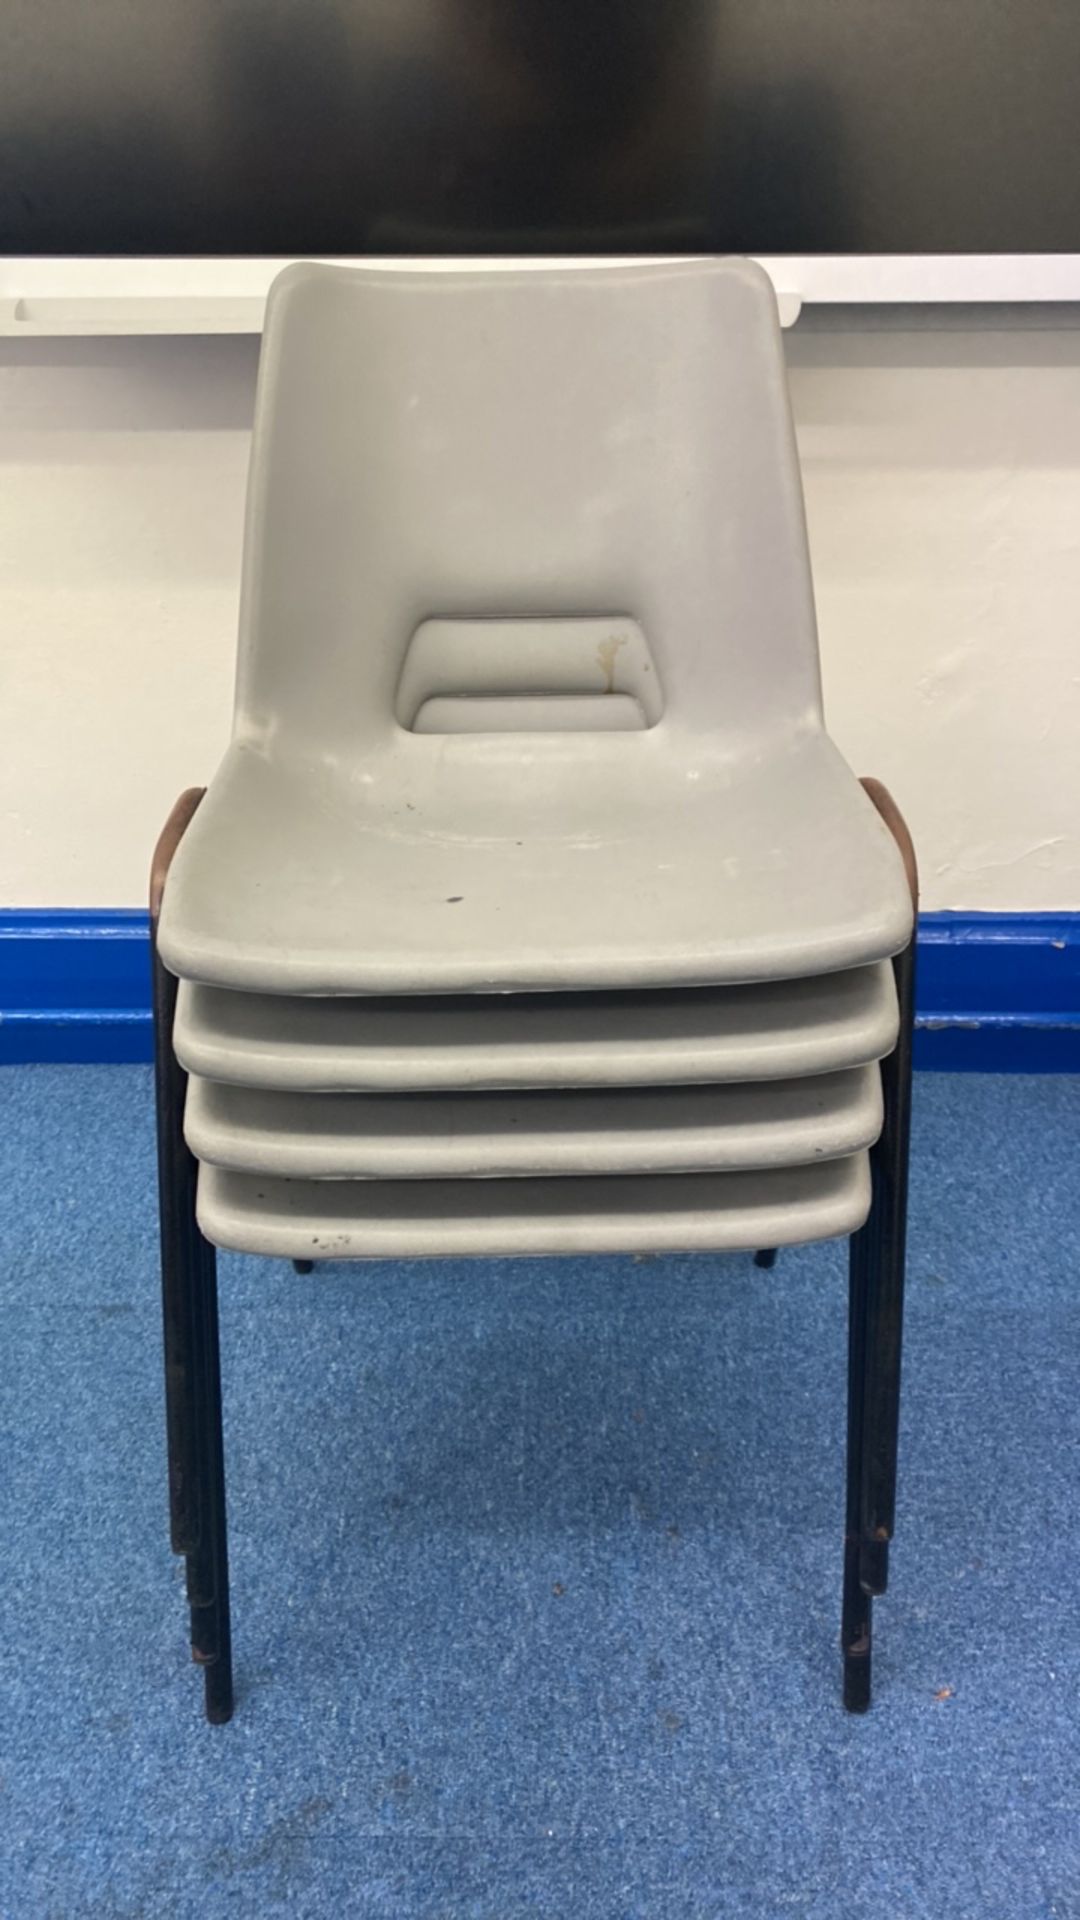 Plastic Assembly Chair X4